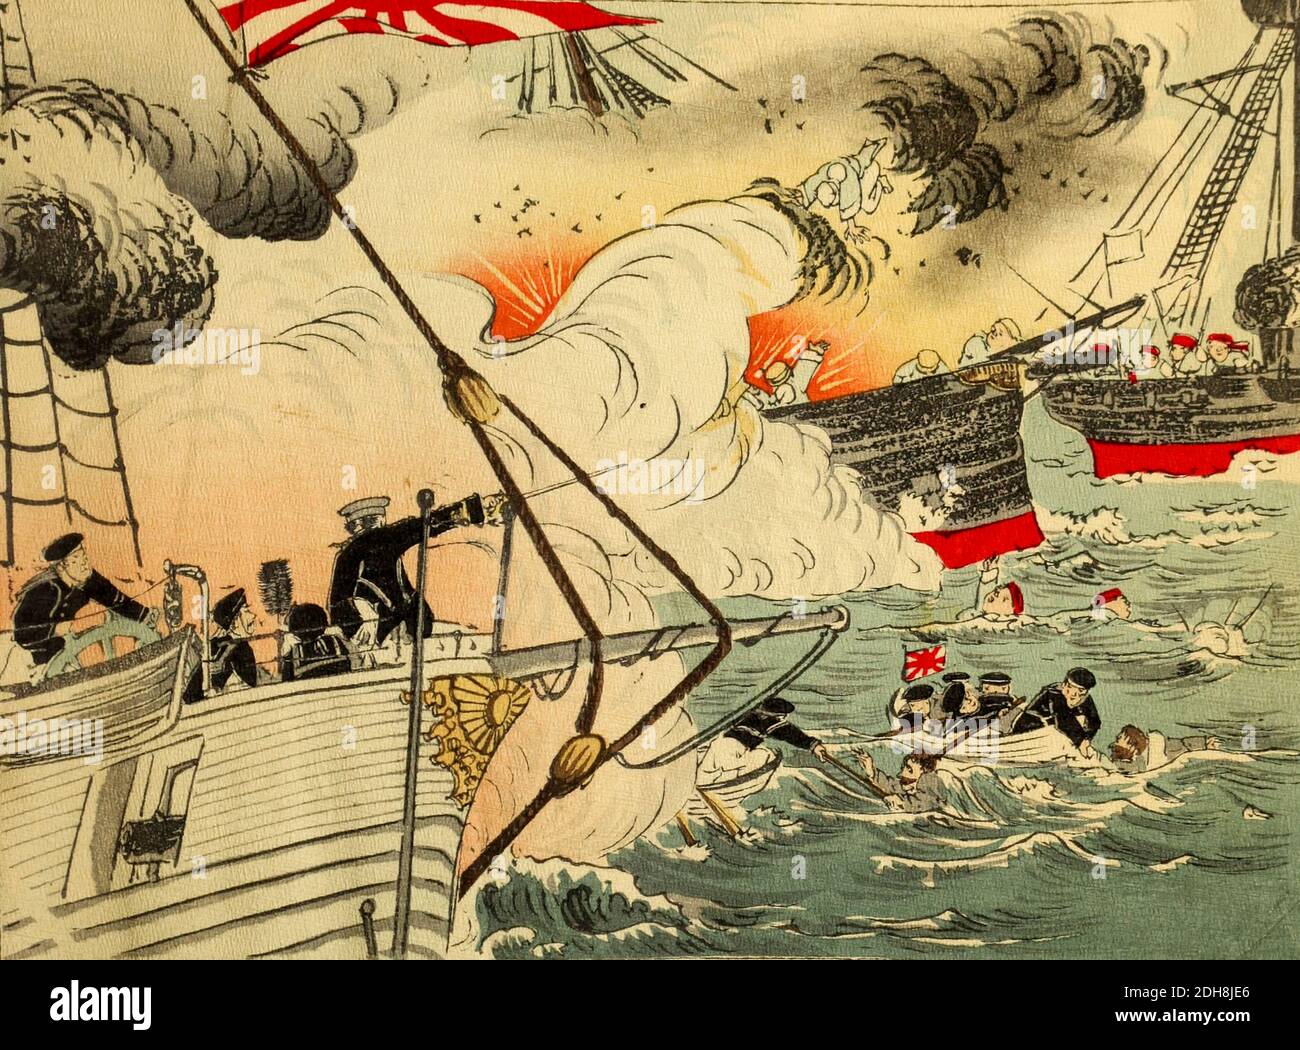 The Battle of Pungdo or Feng-tao [Here as Phungdo] was the first naval battle of the First Sino-Japanese War. It took place on 25 July 1894 off Asan, Chungcheongnam-do, Korea, between cruisers of the Imperial Japanese Navy and components of the Chinese Beiyang Fleet. From the book 'Scenes from the Japan-China War' by Inouye, Jukichi, 1862-1929; Yamamoto, Eiki, illustrator. Published in Tokyo in 1895 with English Text. The First Sino-Japanese War (25 July 1894 – 17 April 1895) was a conflict between the Qing dynasty of China and the Empire of Japan primarily over influence in Joseon Korea. Afte Stock Photo